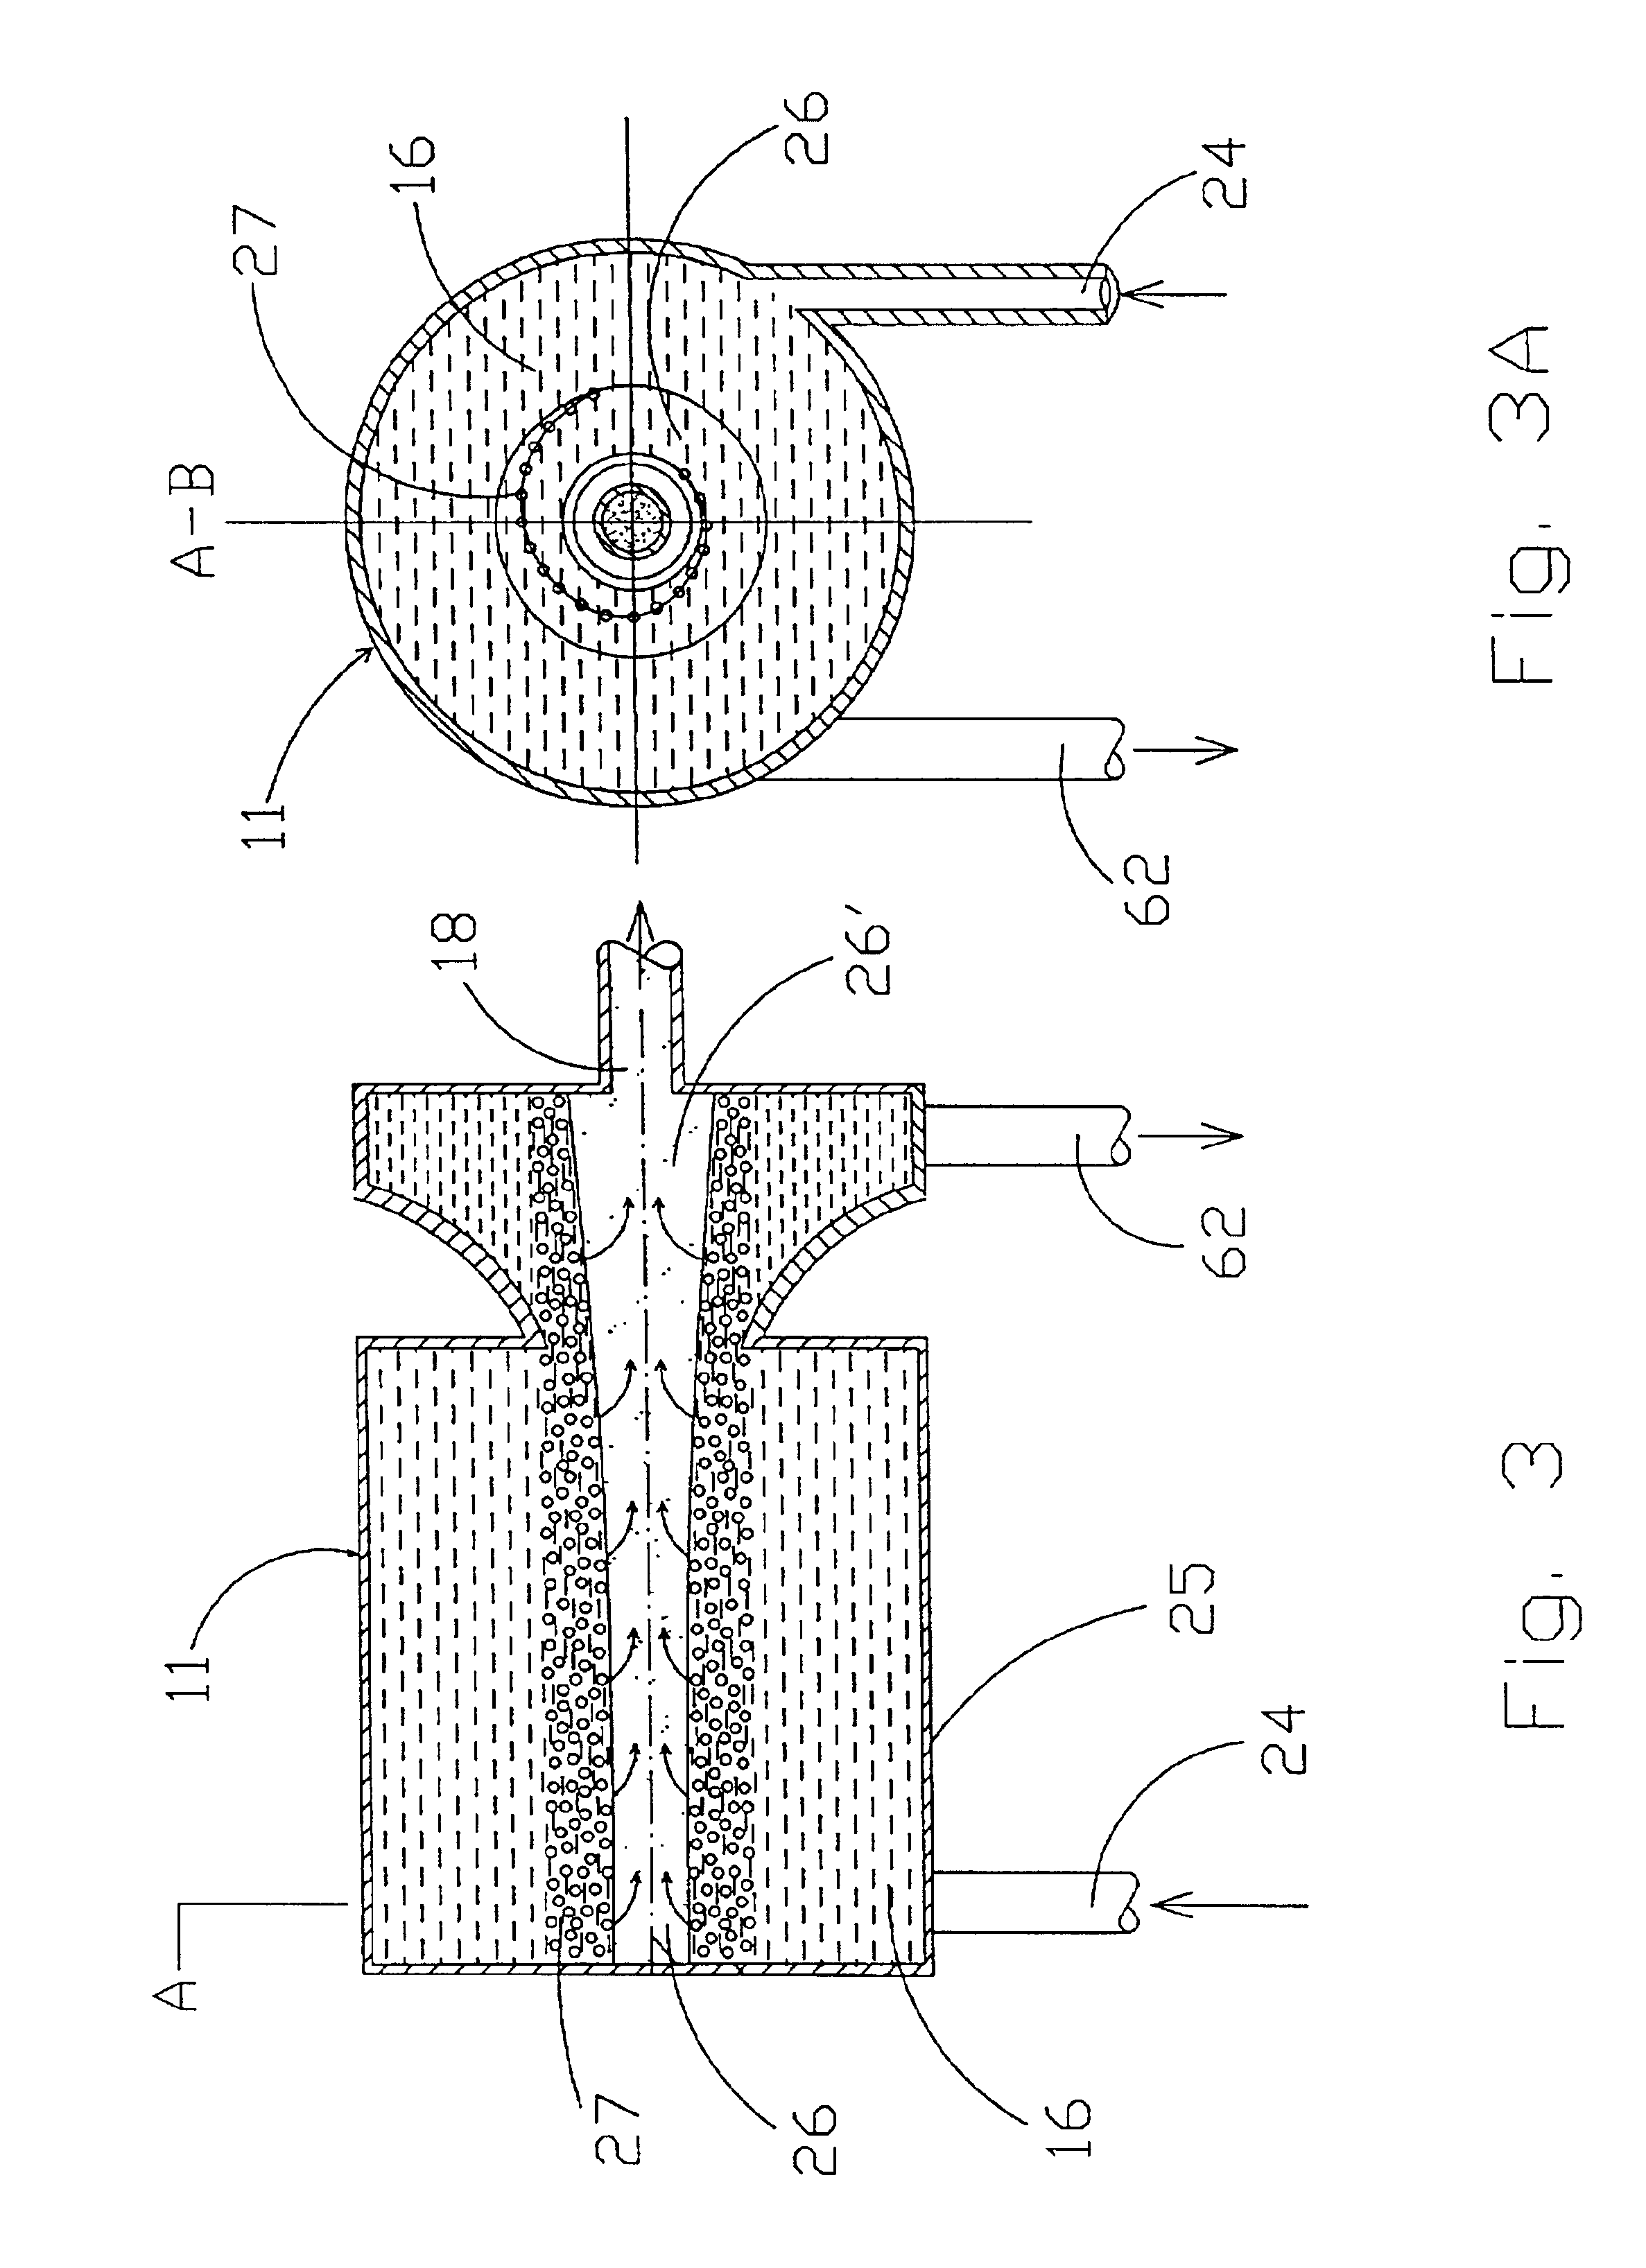 System for thermal and catalytic cracking of crude oil